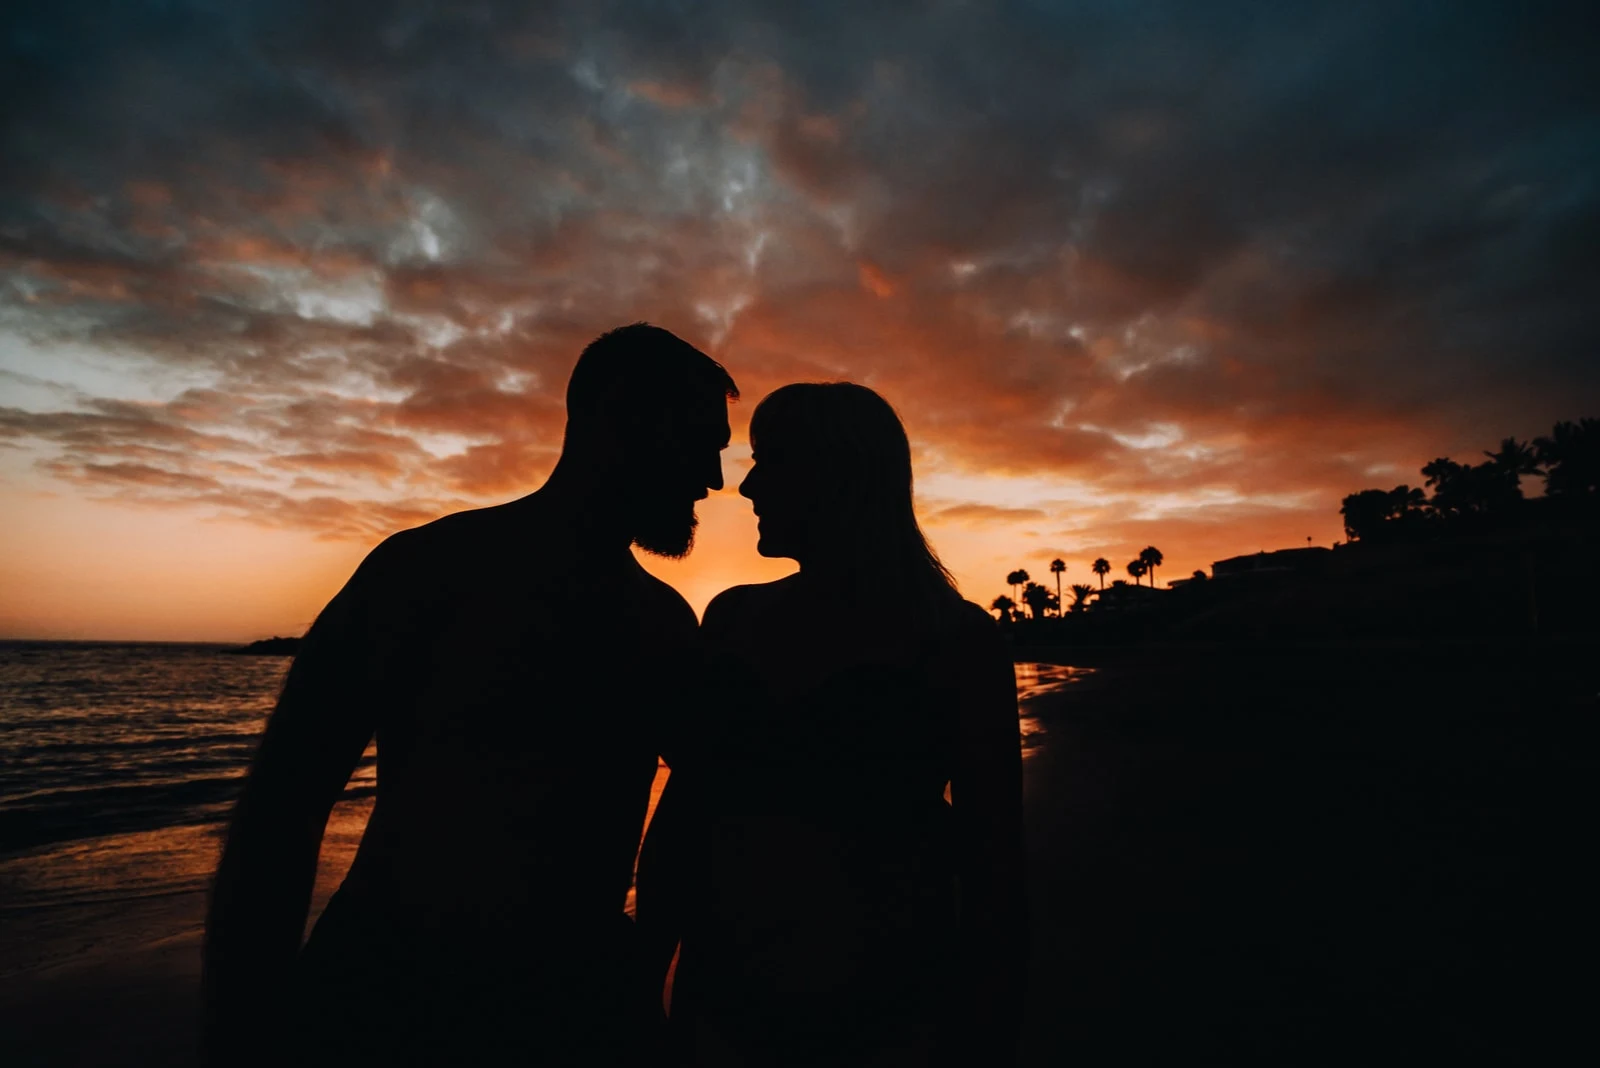 Romantic couple on the beach in a colorful sunset in the background